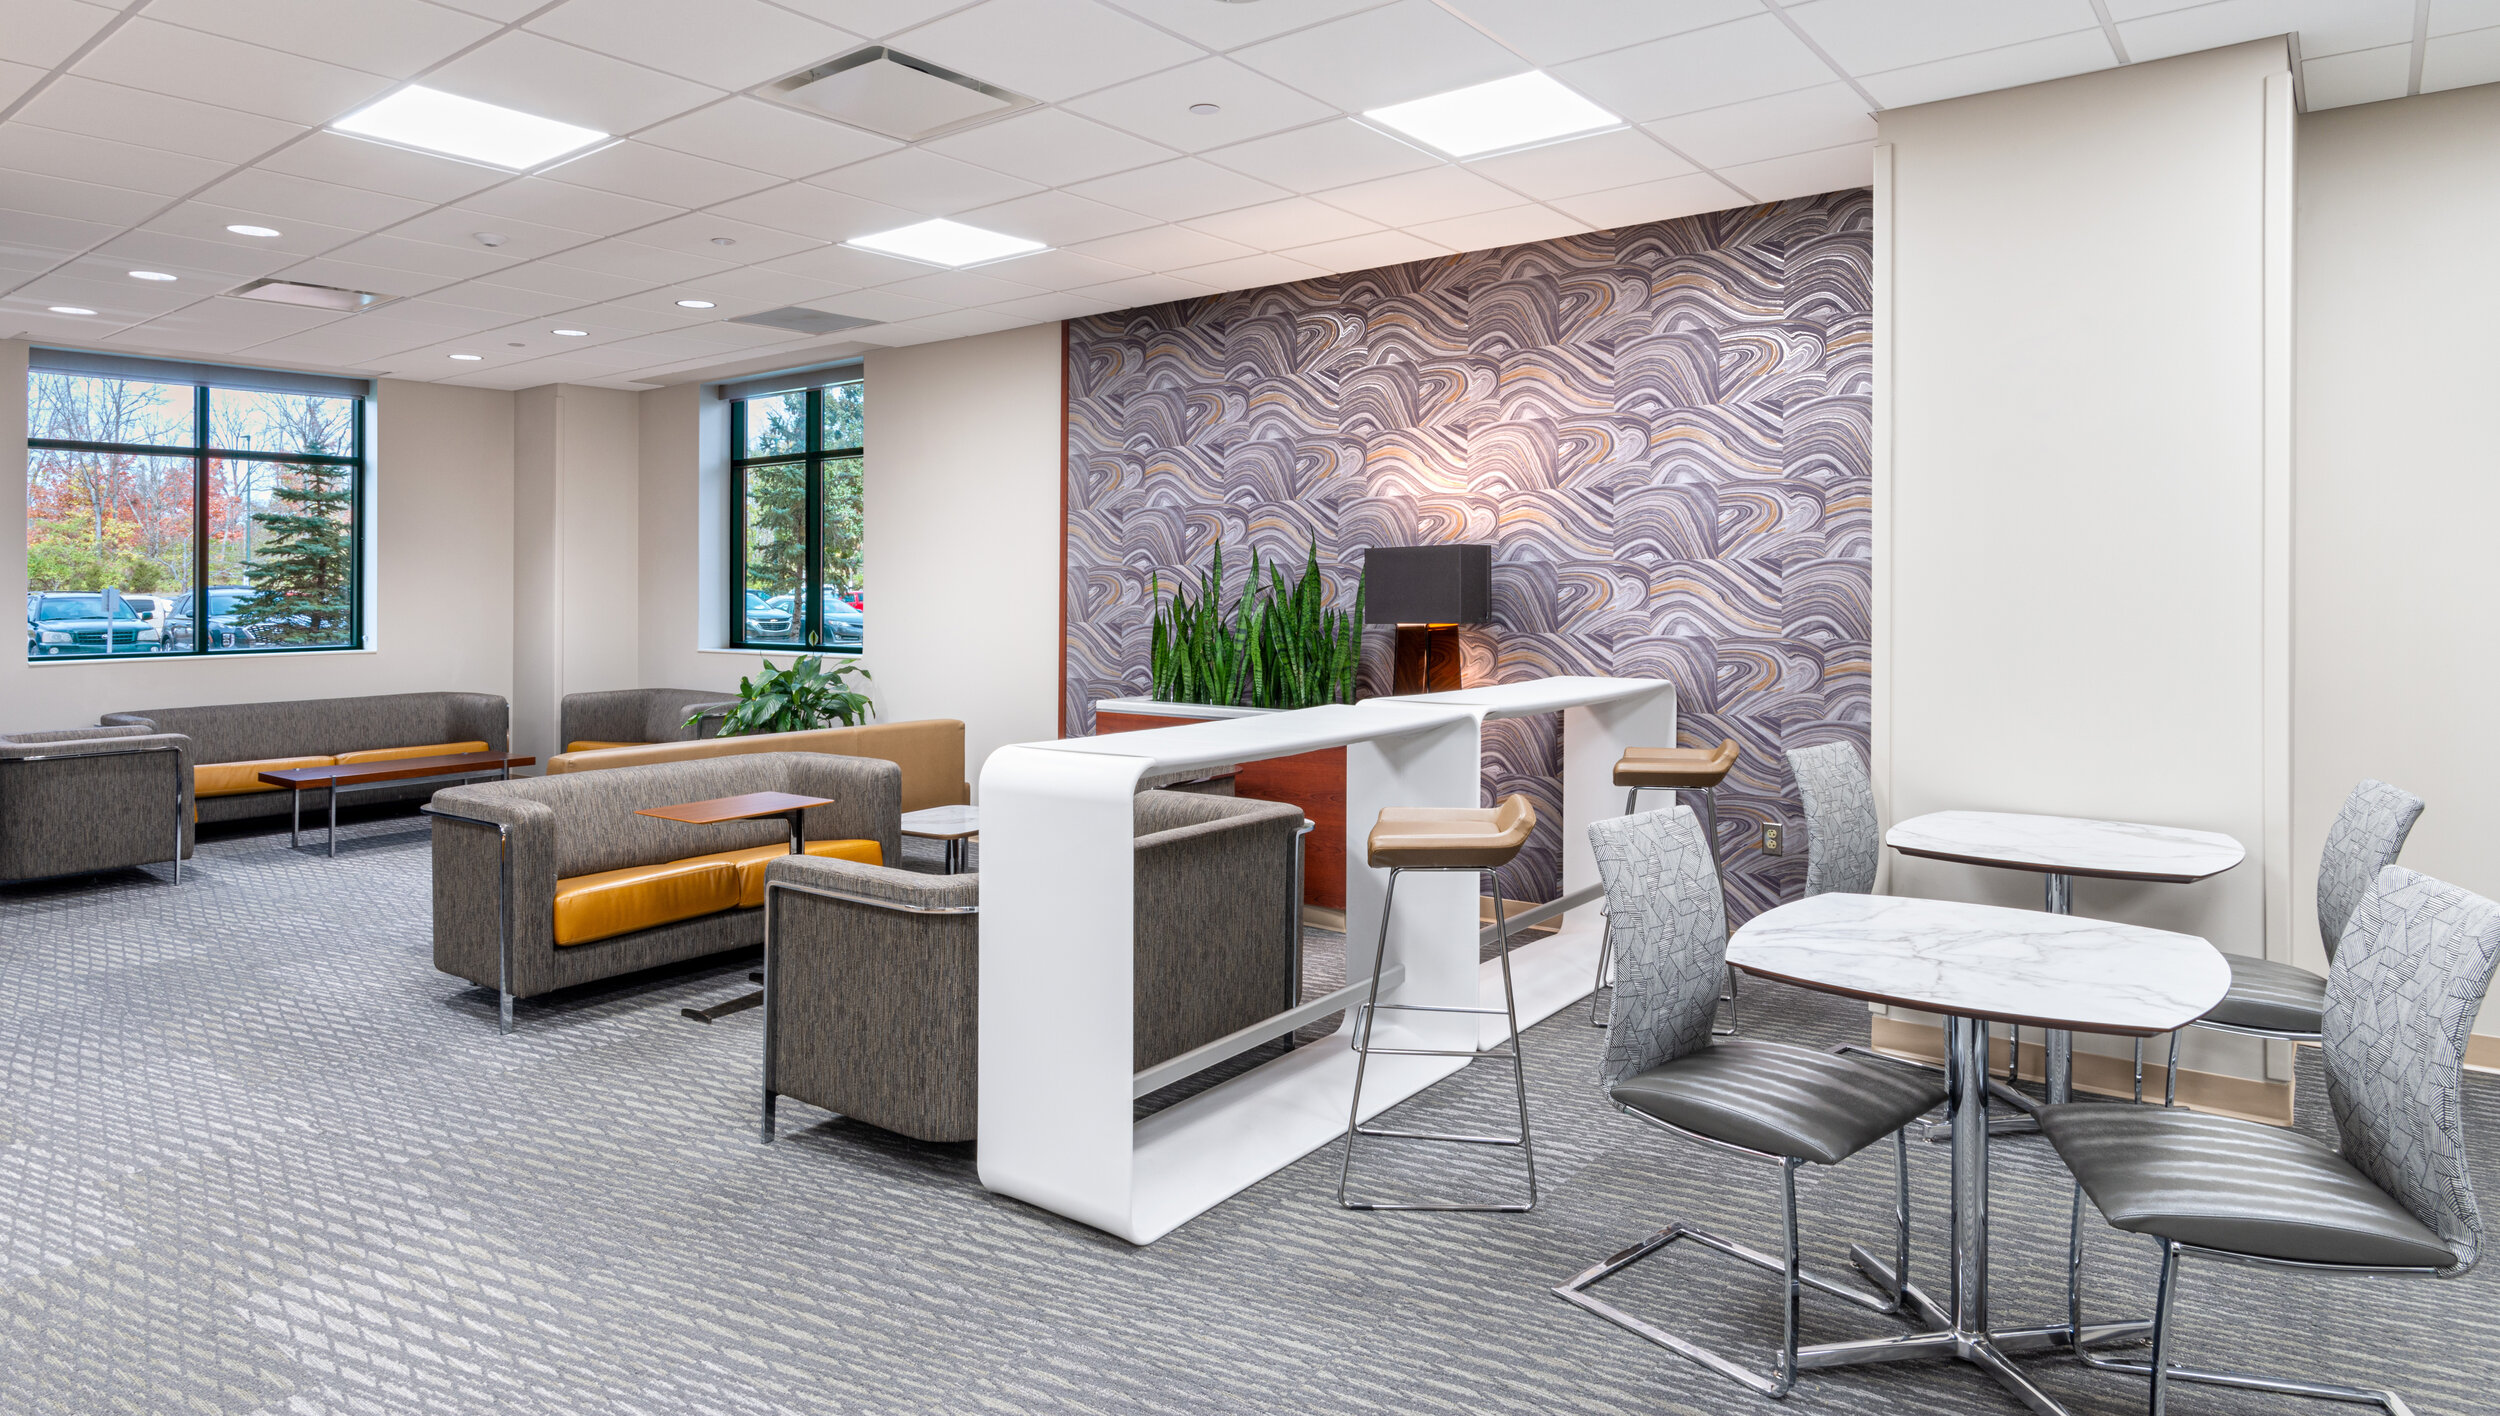 The lounge of a healthcare center, photographed by interior photographer Al Ensley.